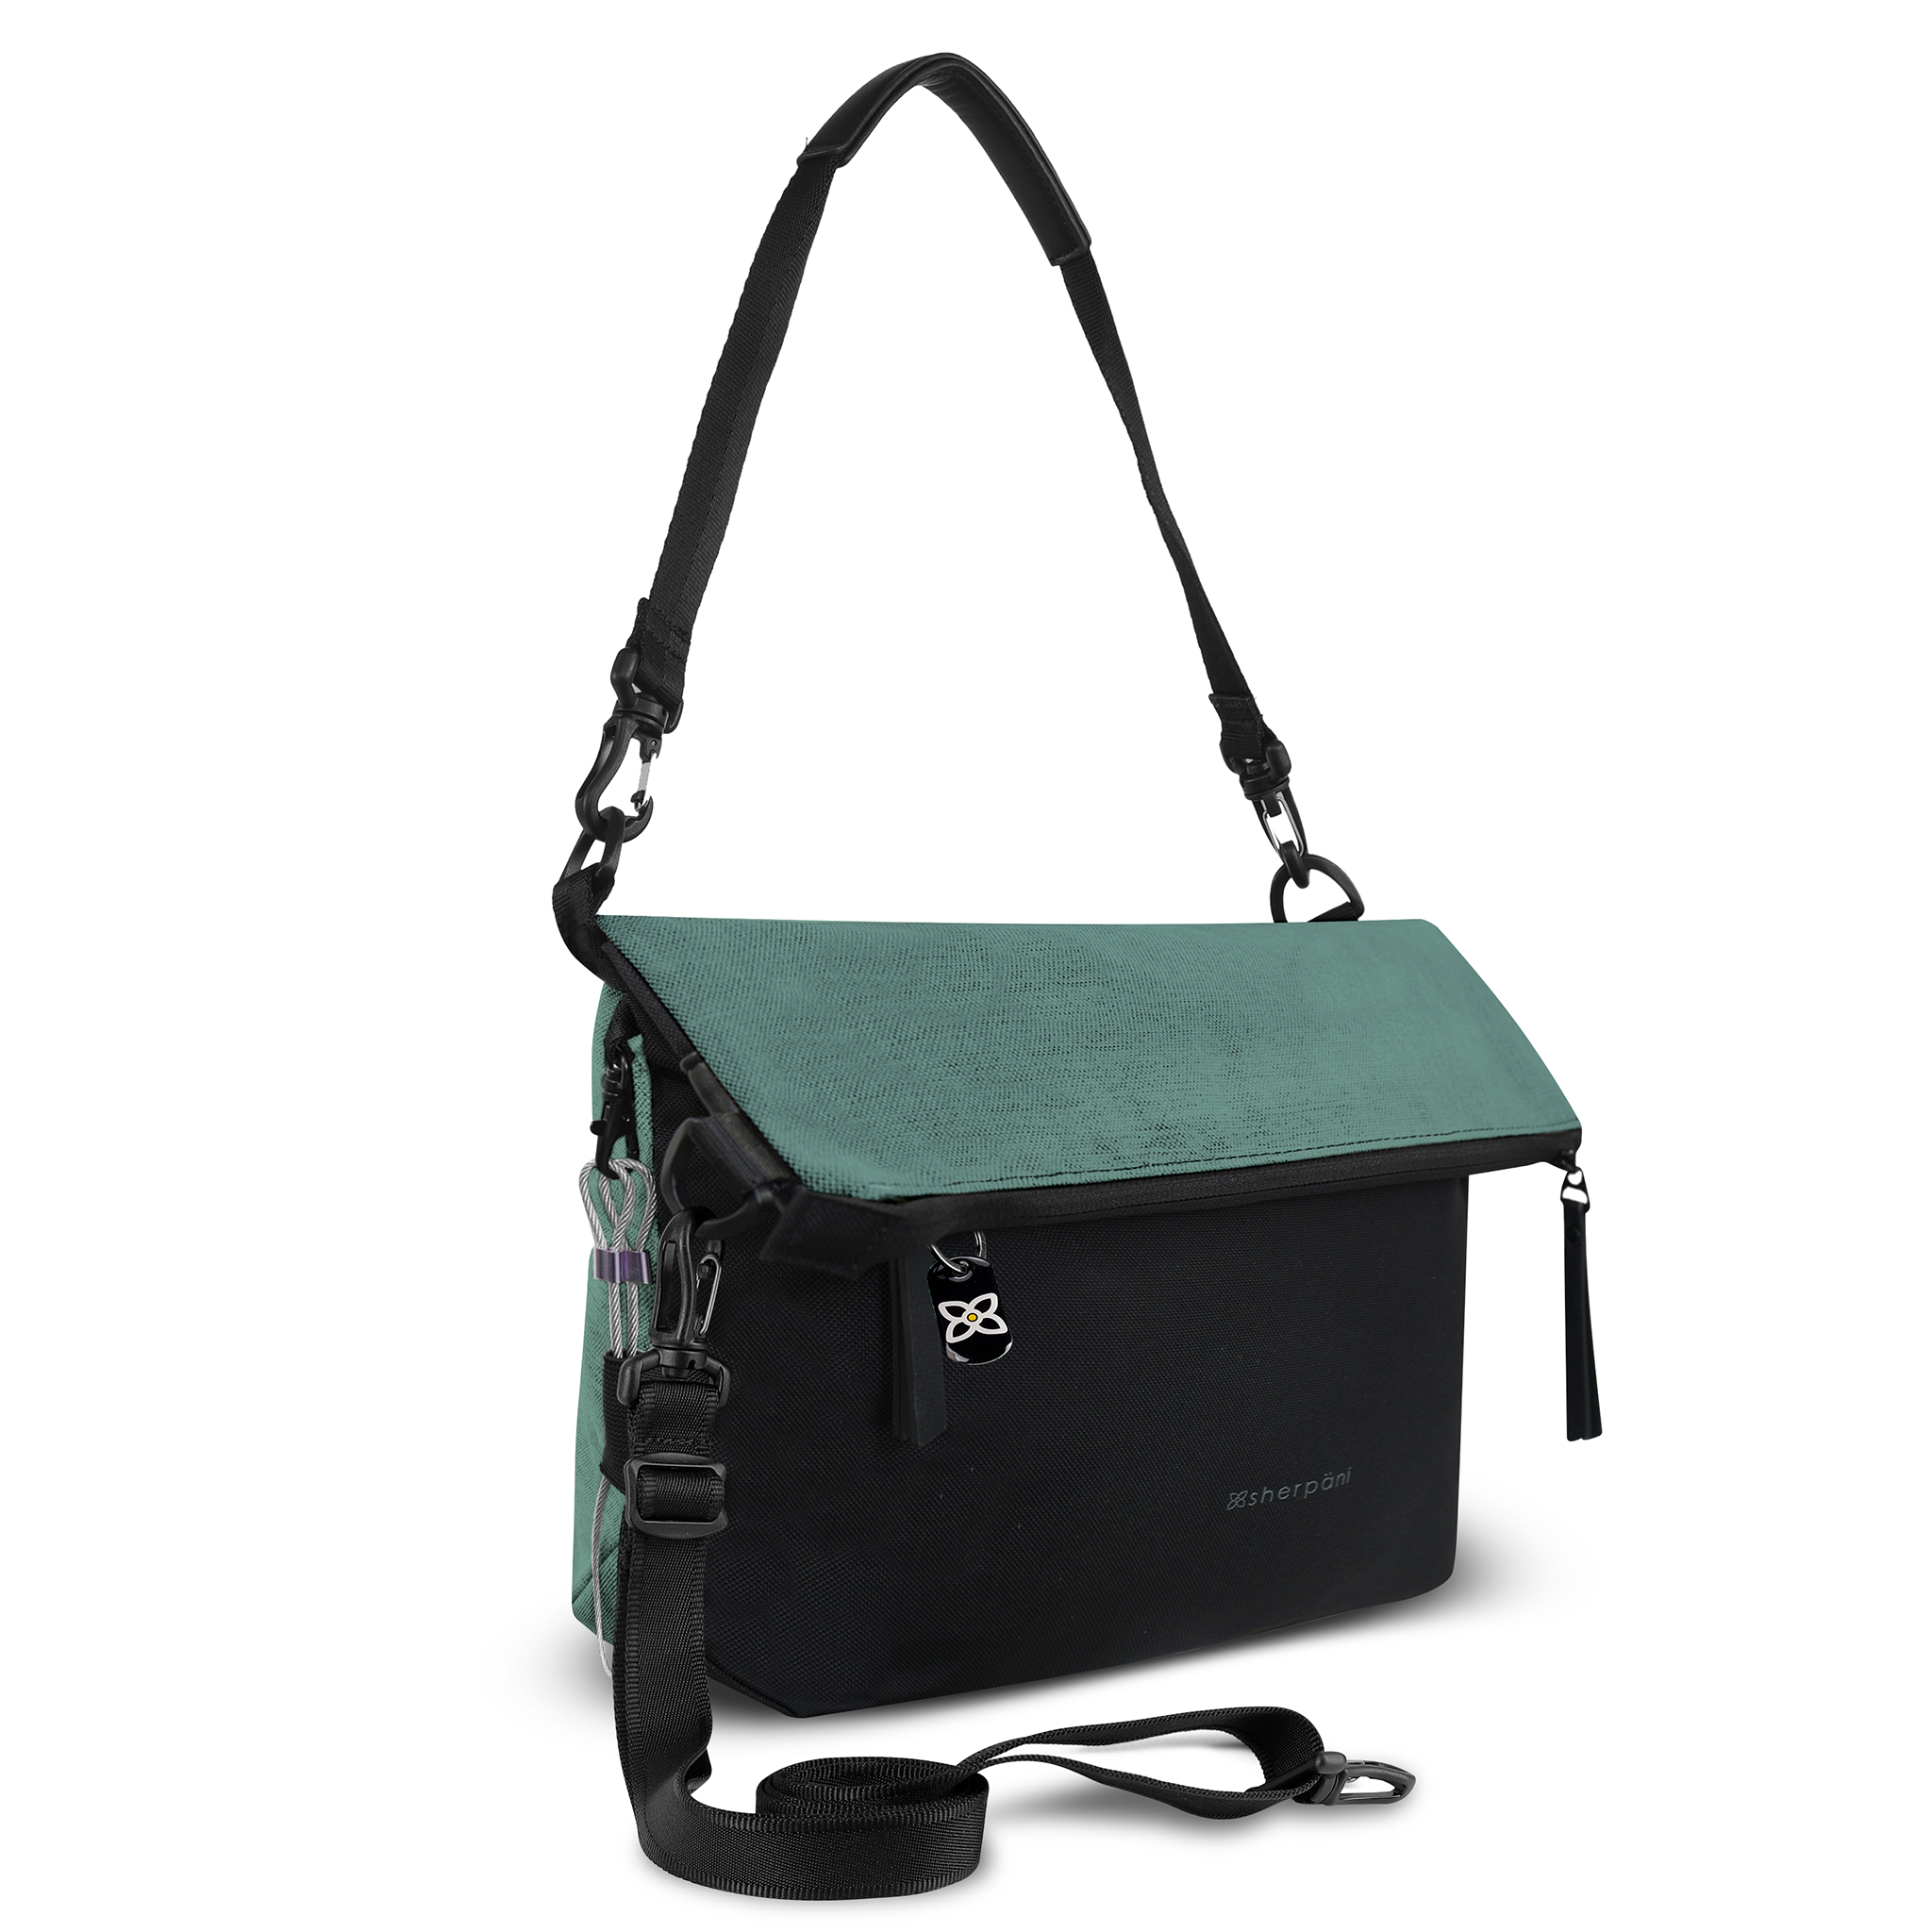 Angled front view of Sherpani's Anti-Theft bag, the Vale AT in Teal, with vegan leather accents in black. The top is folded over creating a signature overlap look. A chair loop lock is connected to a key fob clip on one side. It has an adjustable/detachable crossbody strap, and a second detachable strap fixed at a shorter length. #color_teal